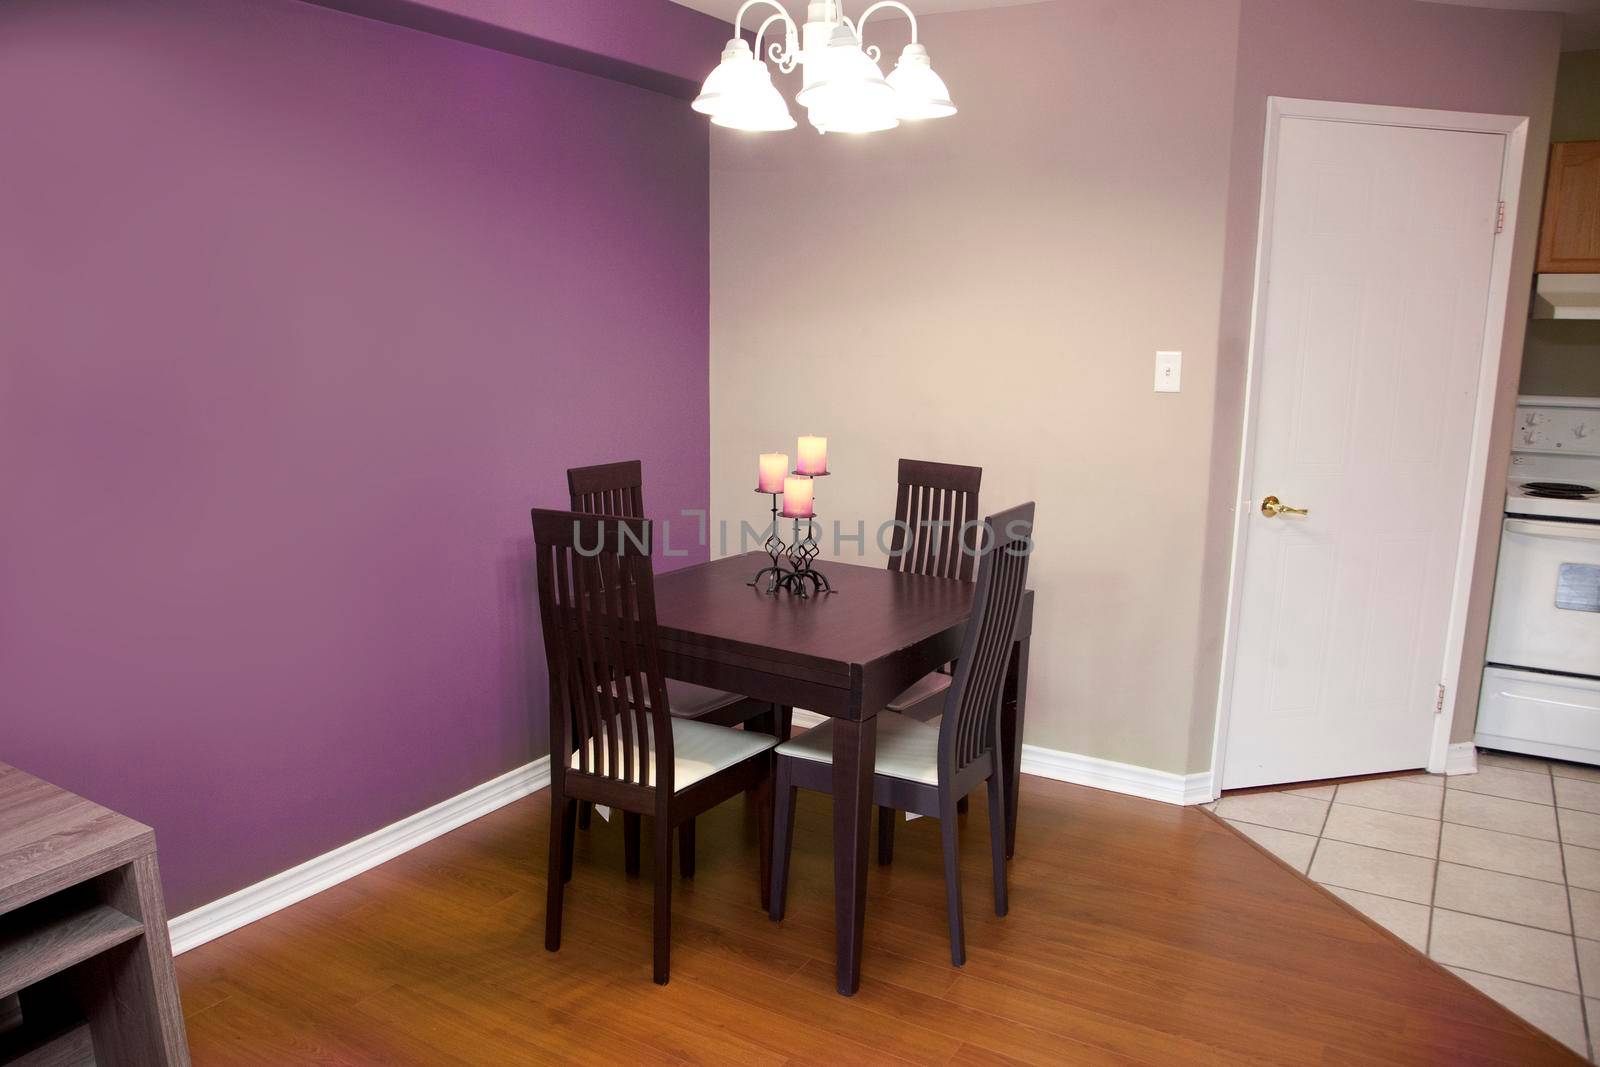 purple walls with a dark wood table and chair set for four in a kitchen or dining area of a home